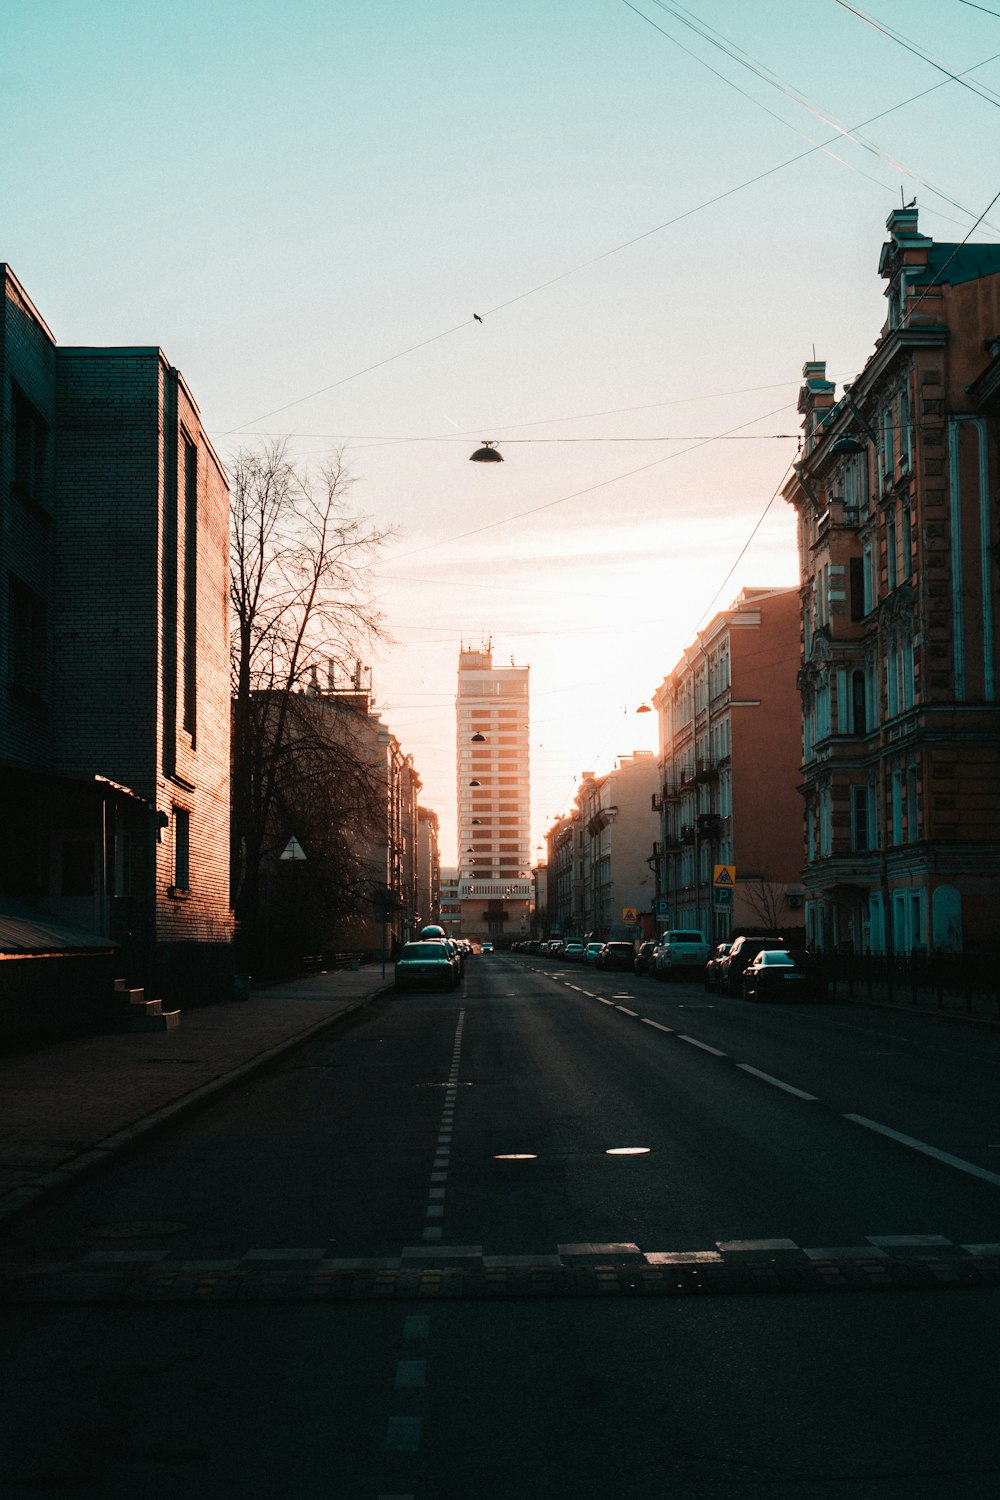 a city street at sunset with a bird flying in the sky